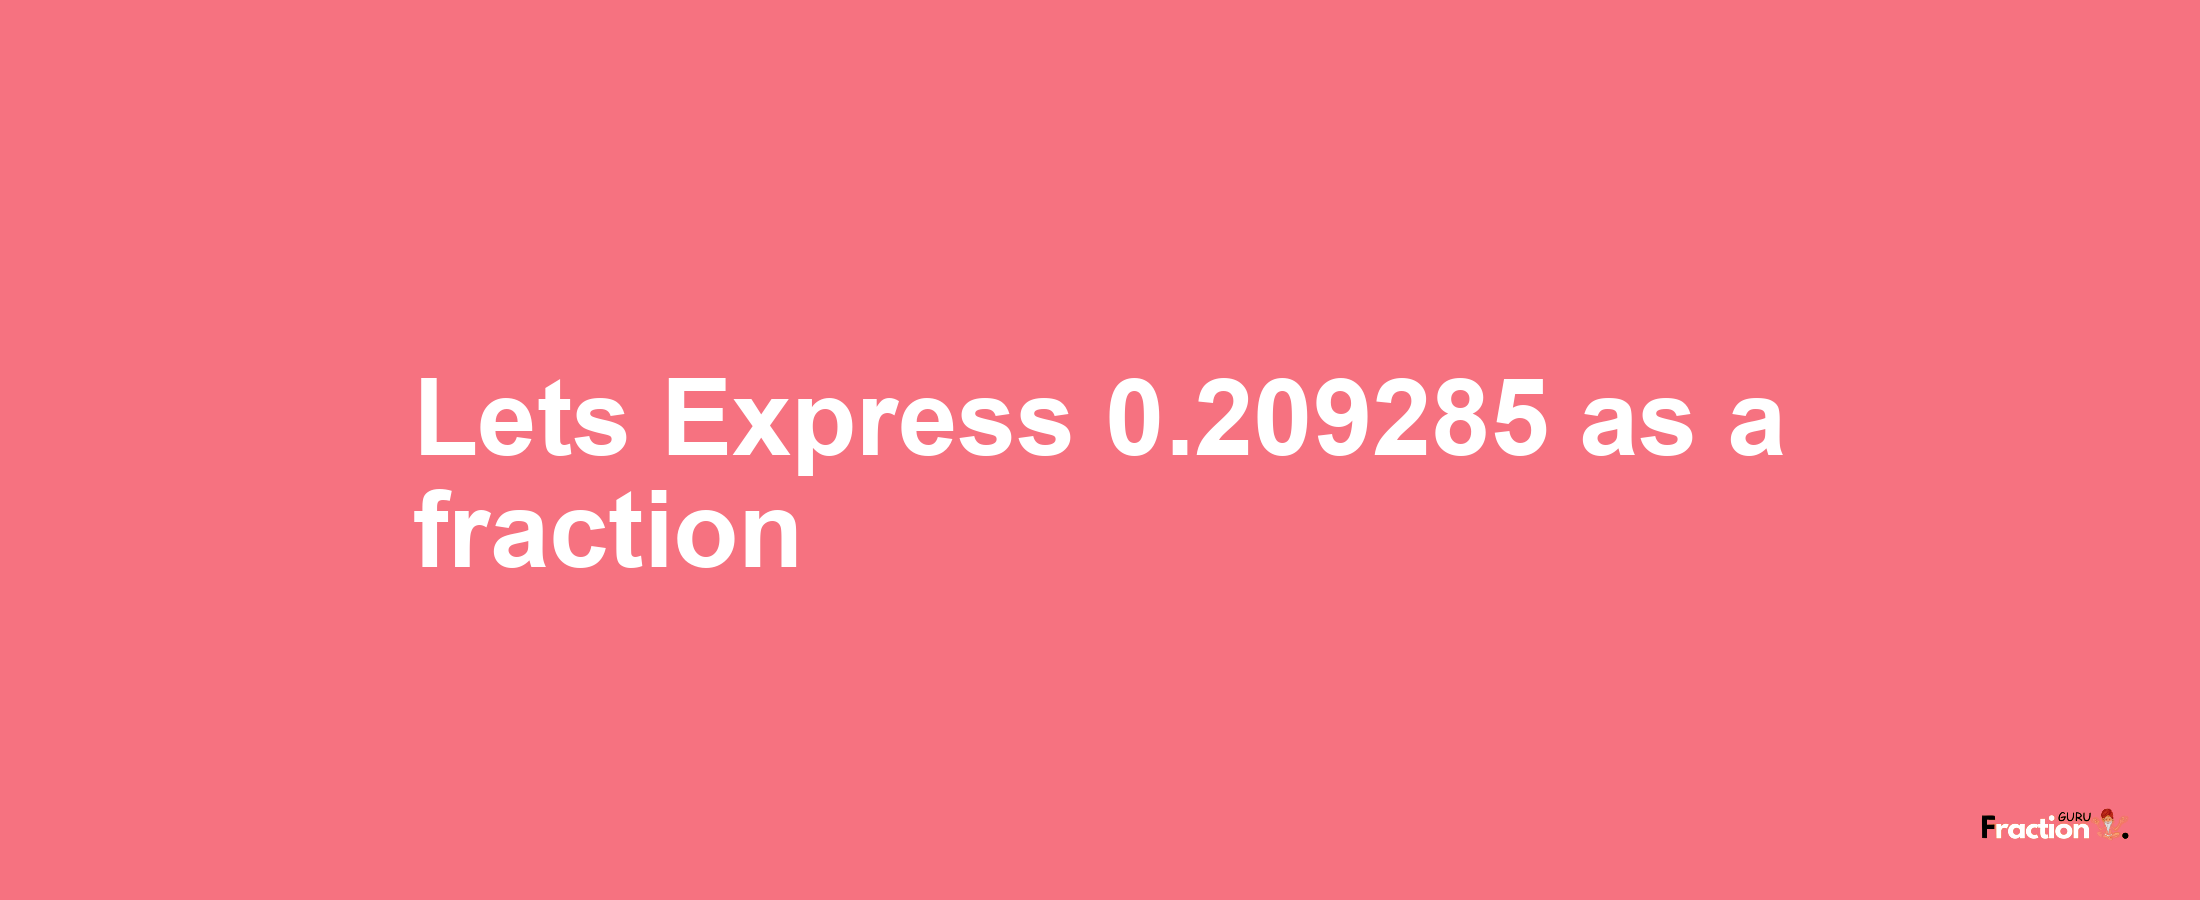 Lets Express 0.209285 as afraction